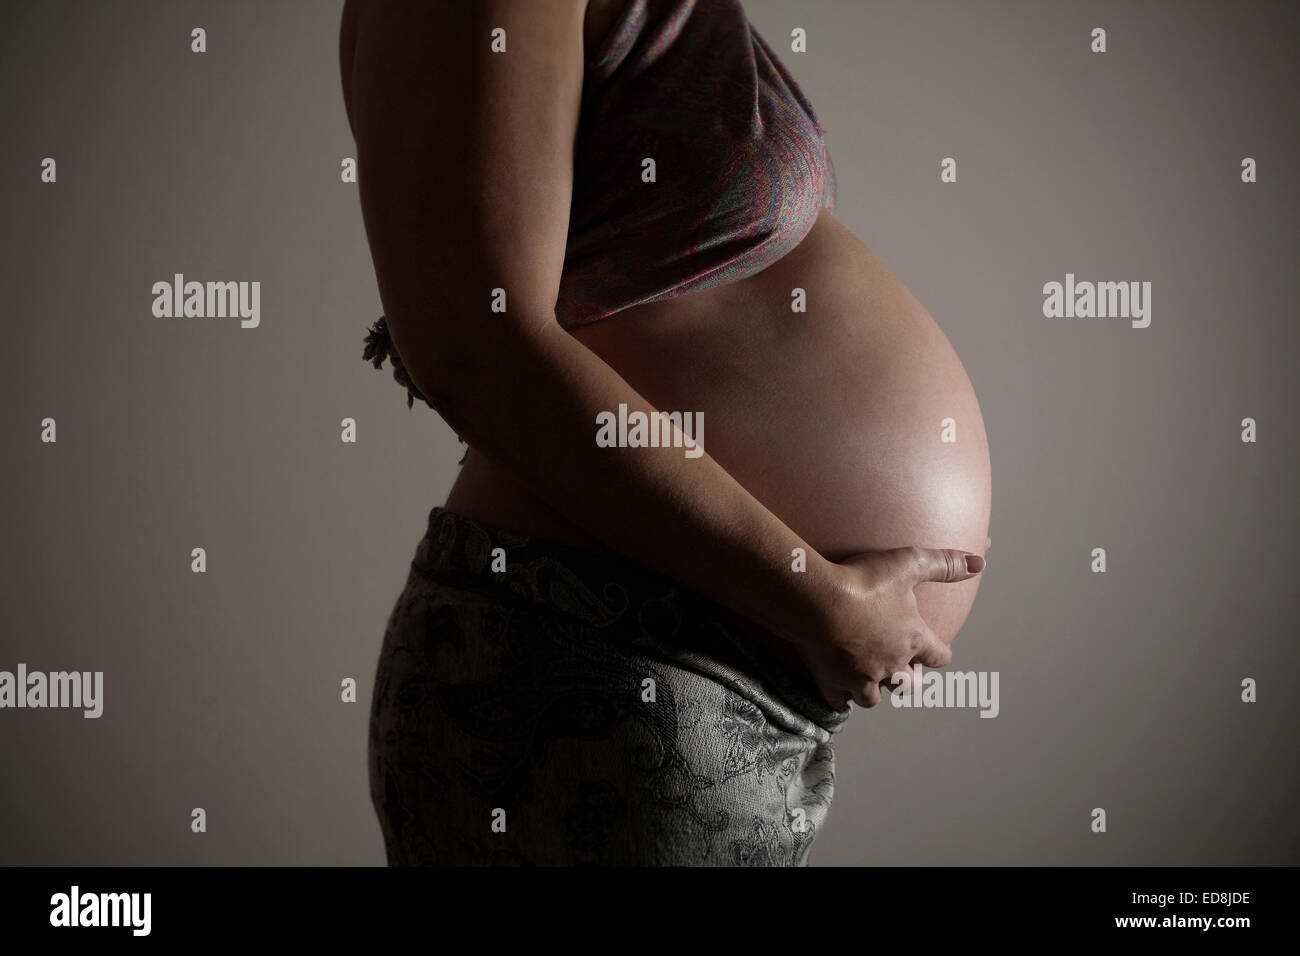 A side shot of a pregnant woman at 37 weeks gestation. Stock Photo